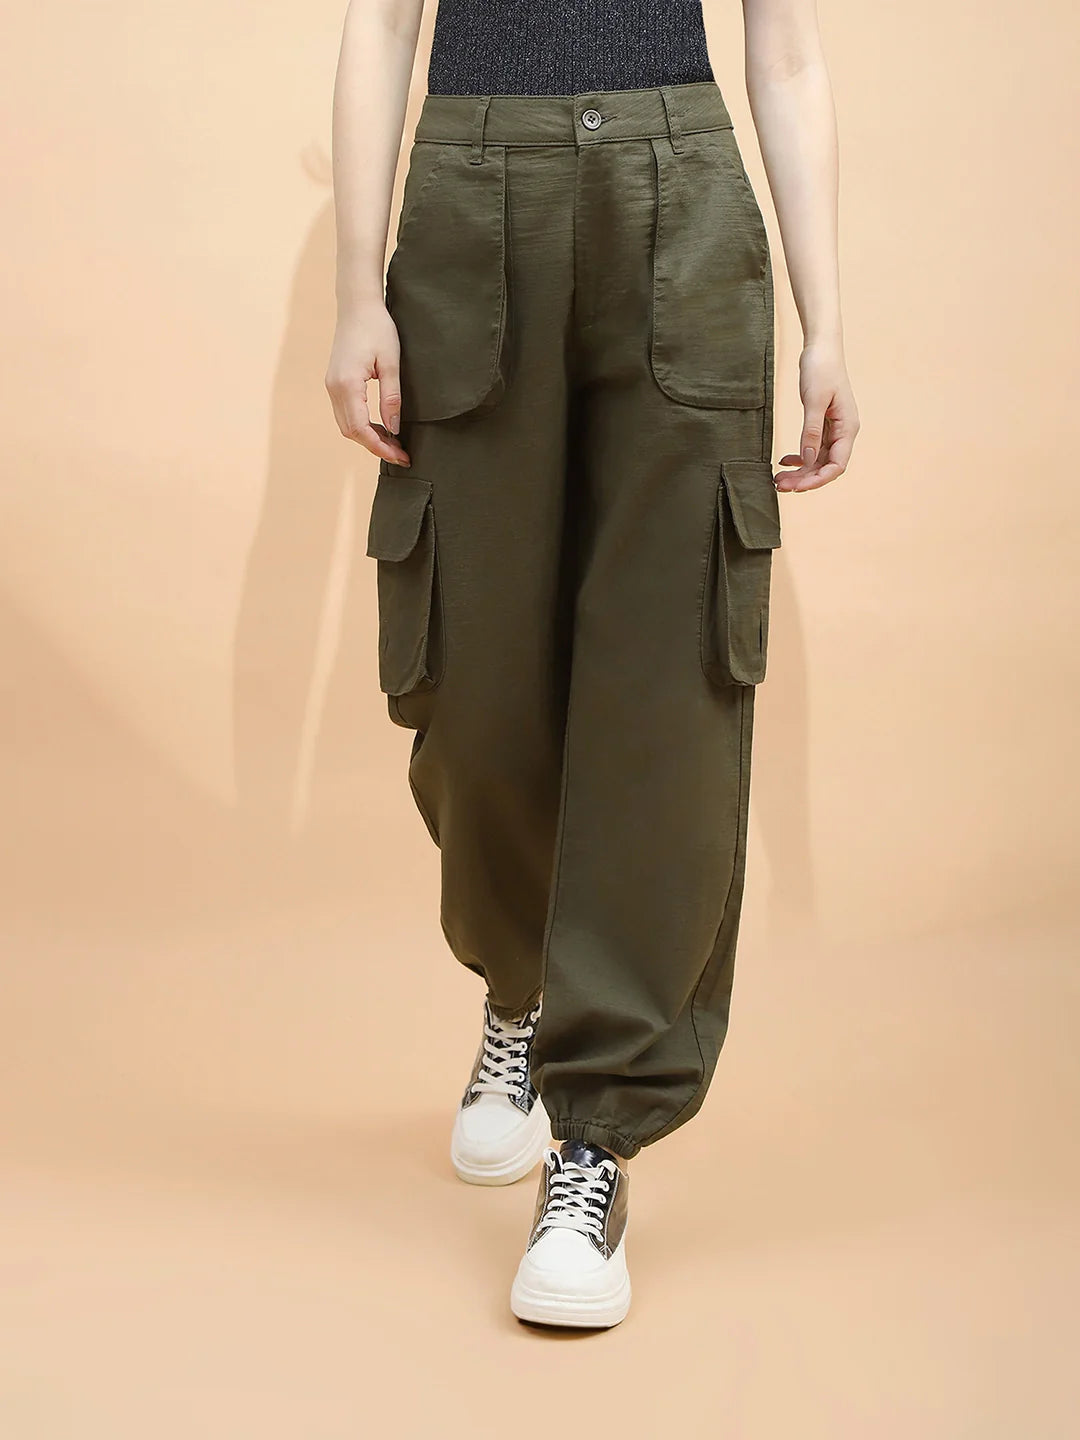 Dark Olive Cotton Loose Fit Jogger For Women - Global Republic #